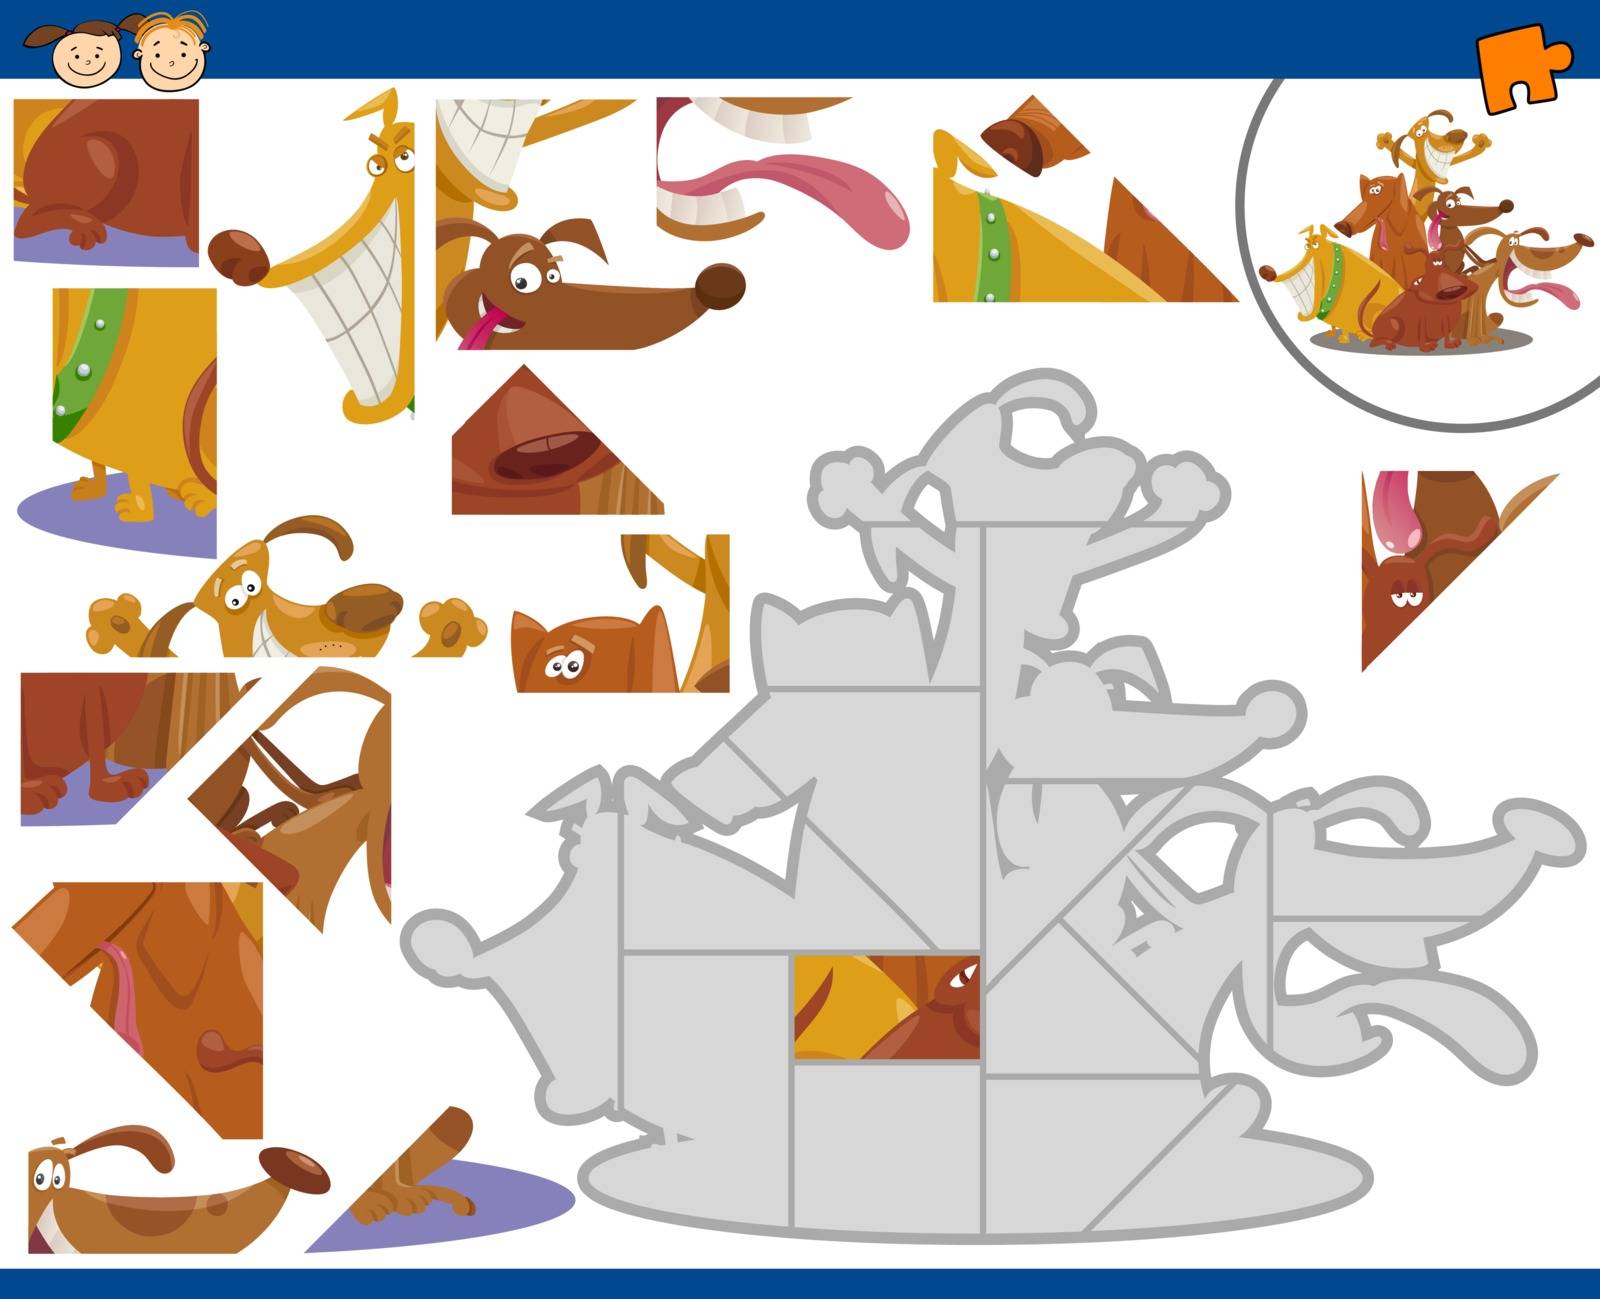 Cartoon Illustration of Educational Jigsaw Puzzle Task for Preschool Children with Dogs Animal Characters